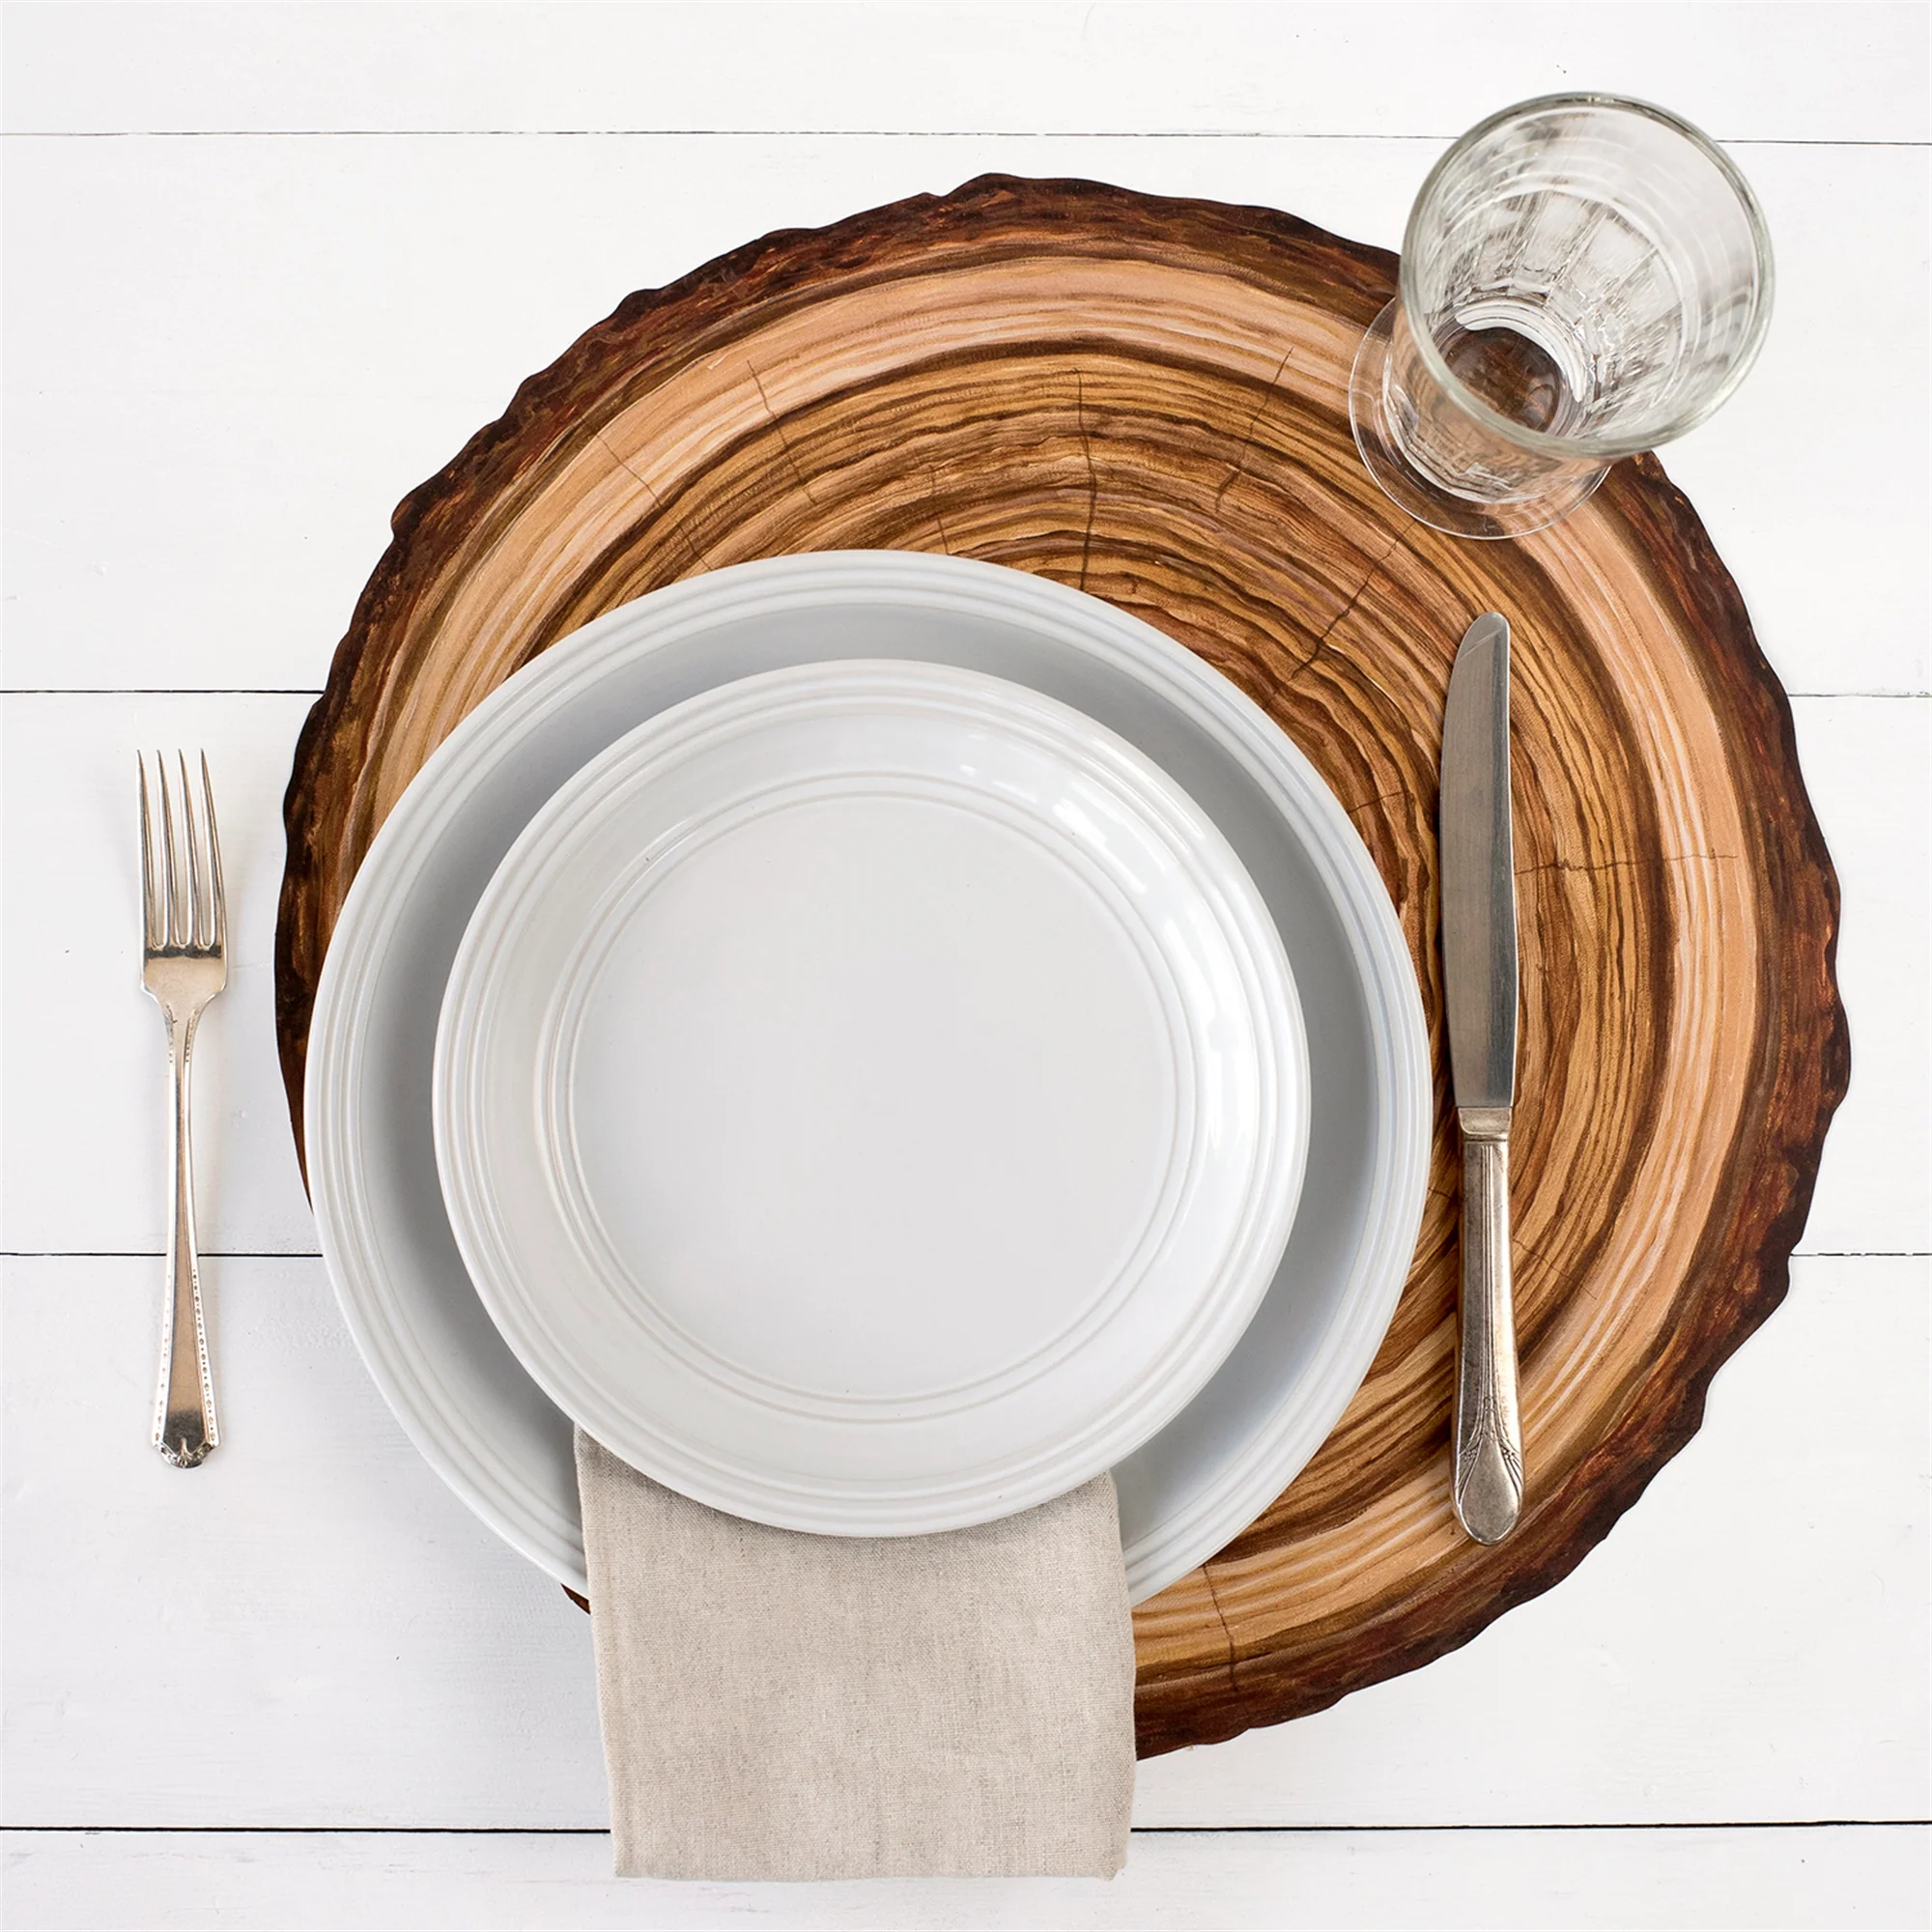 Hester & Cook Die Cut Wood Slice Paper Placemats